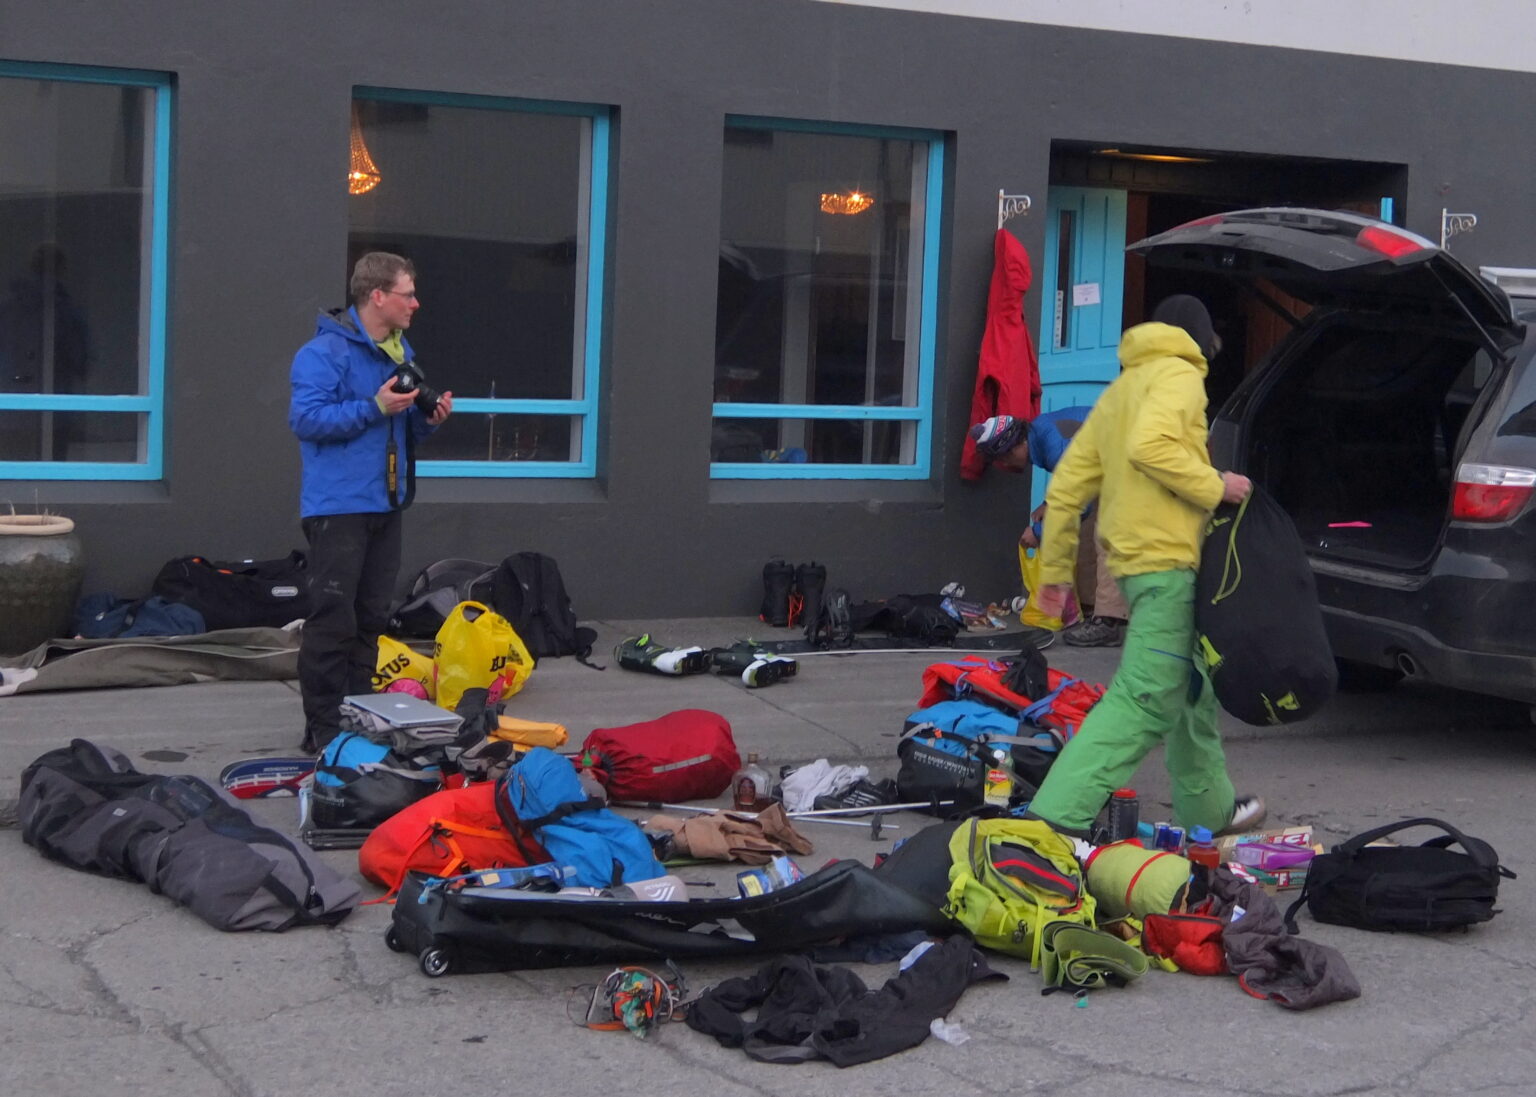 Packing our bags before leaving Iceland